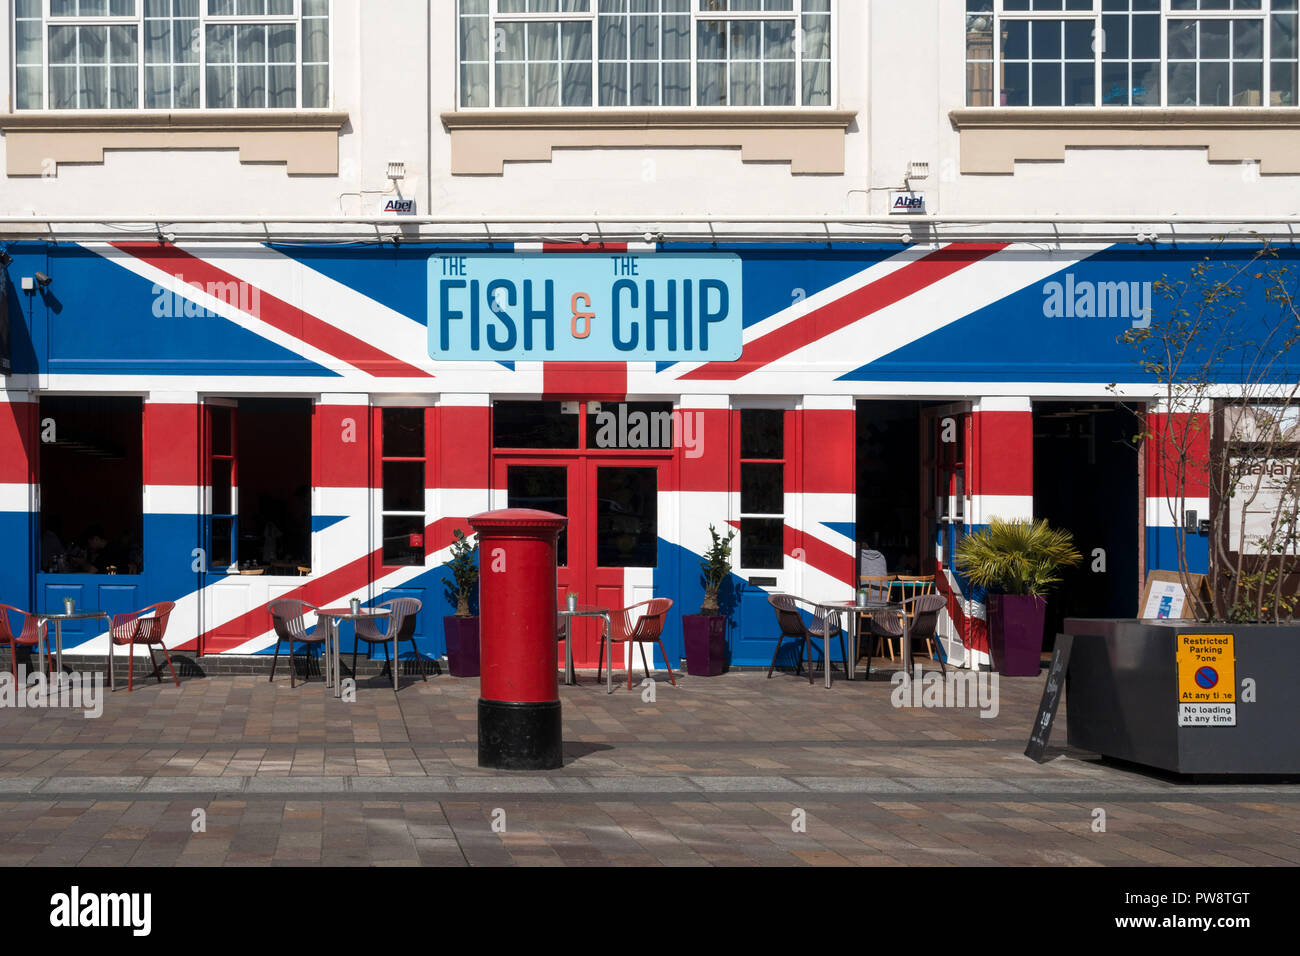 Exterior of 'The Fish and The Chip' restaurant painted with colourful red, white and blue Union Jack Flag, Jubilee Square, Leicester, England, UK Stock Photo